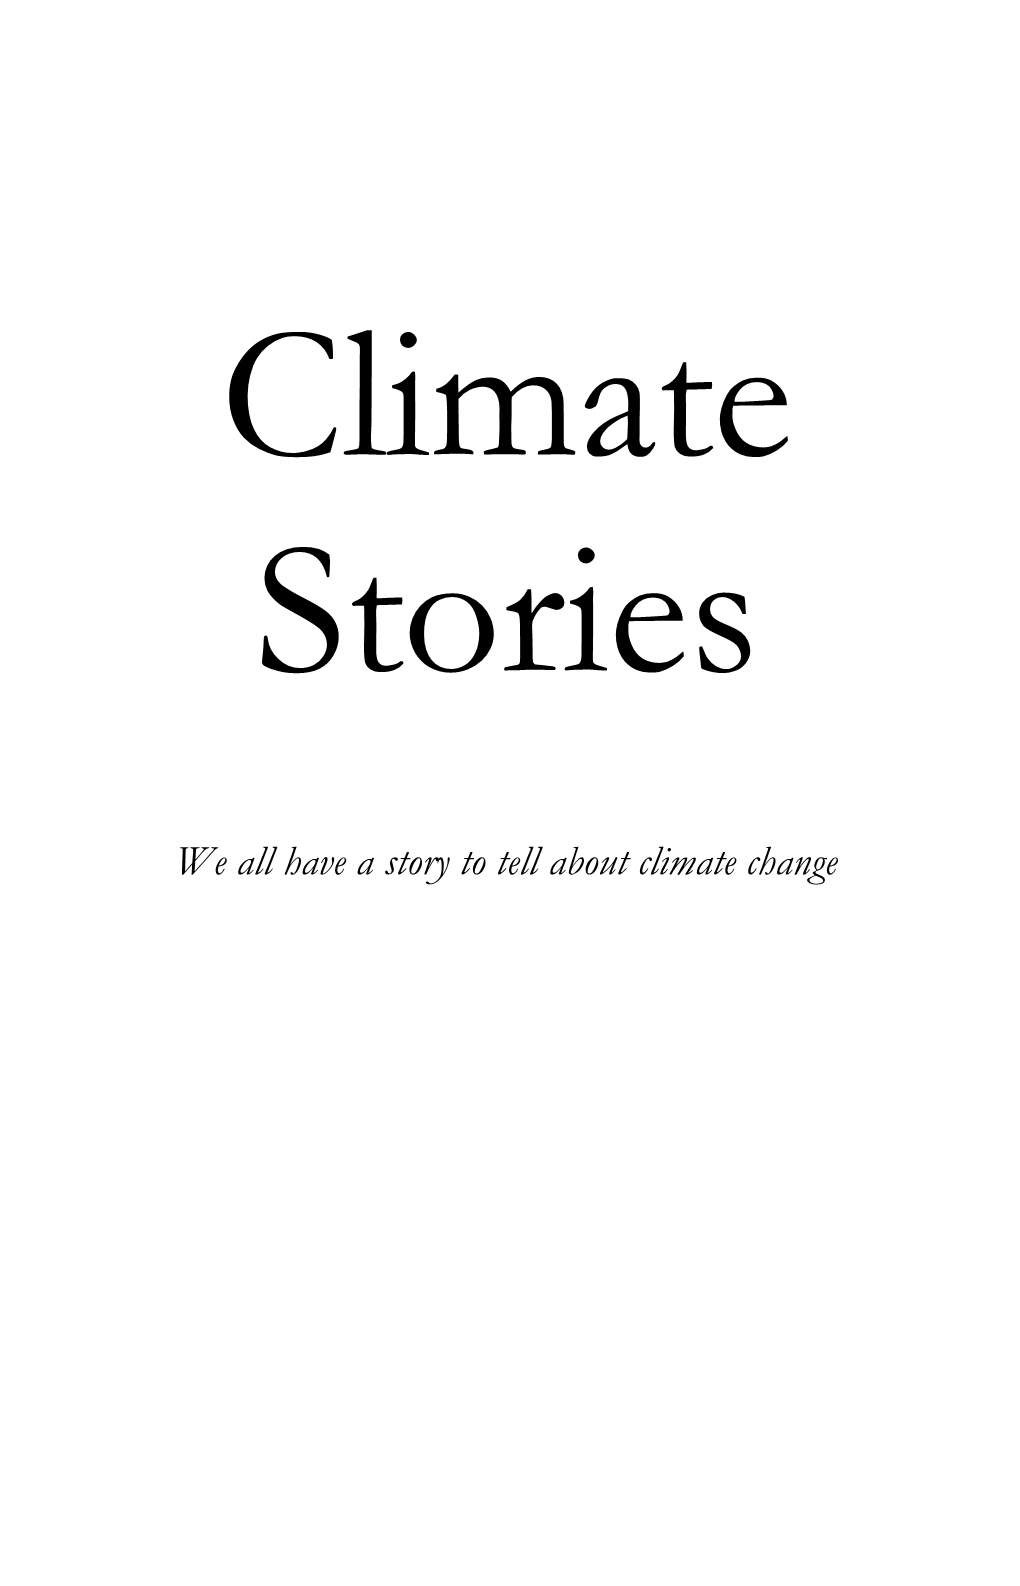 We All Have a Story to Tell About Climate Change